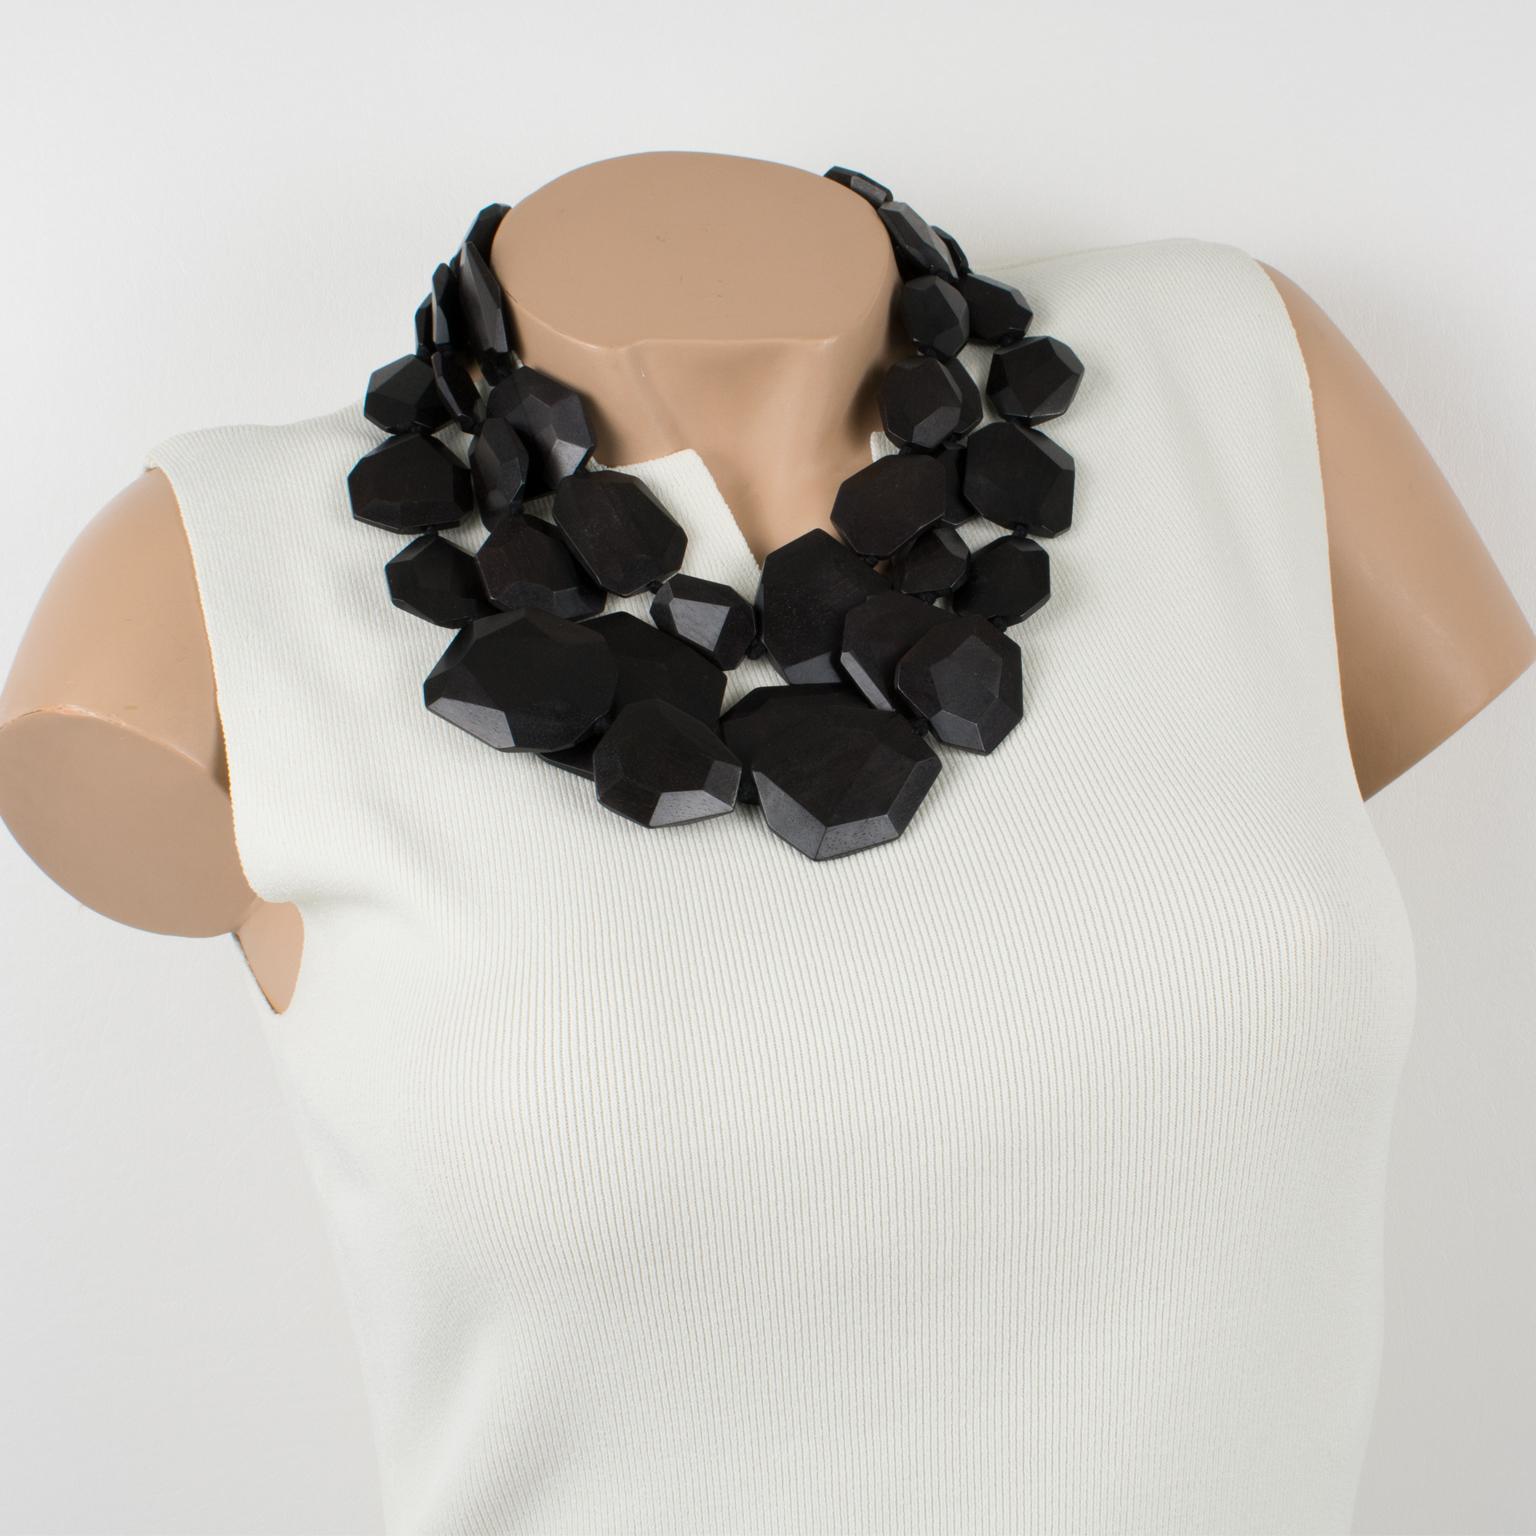 Spectacular oversized wood necklace by Gerda Lyngaard for Monies. Chunky hand-crafted three strands of carved pebbles shaped beads in black Ebony wood. Black leather closure clasp. A real stunning piece by one of the best contemporary fashion